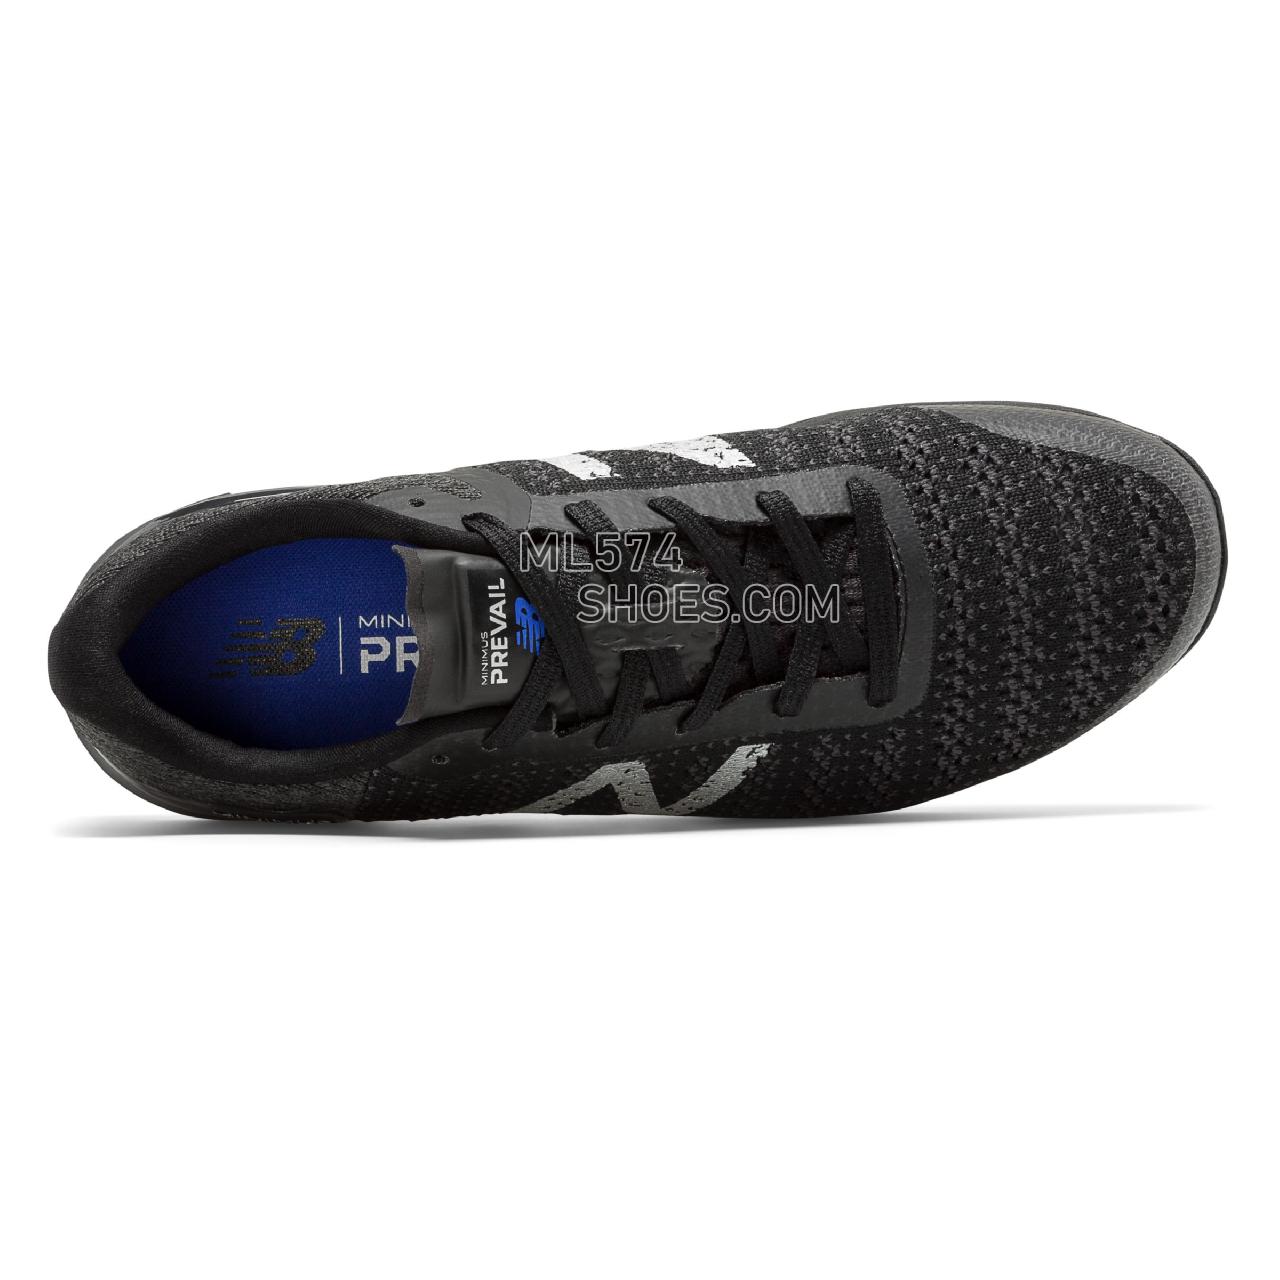 New Balance Minimus Prevail - Men's Cross-Training - Black with Magnet and Metallic Silver - MXMPLB1